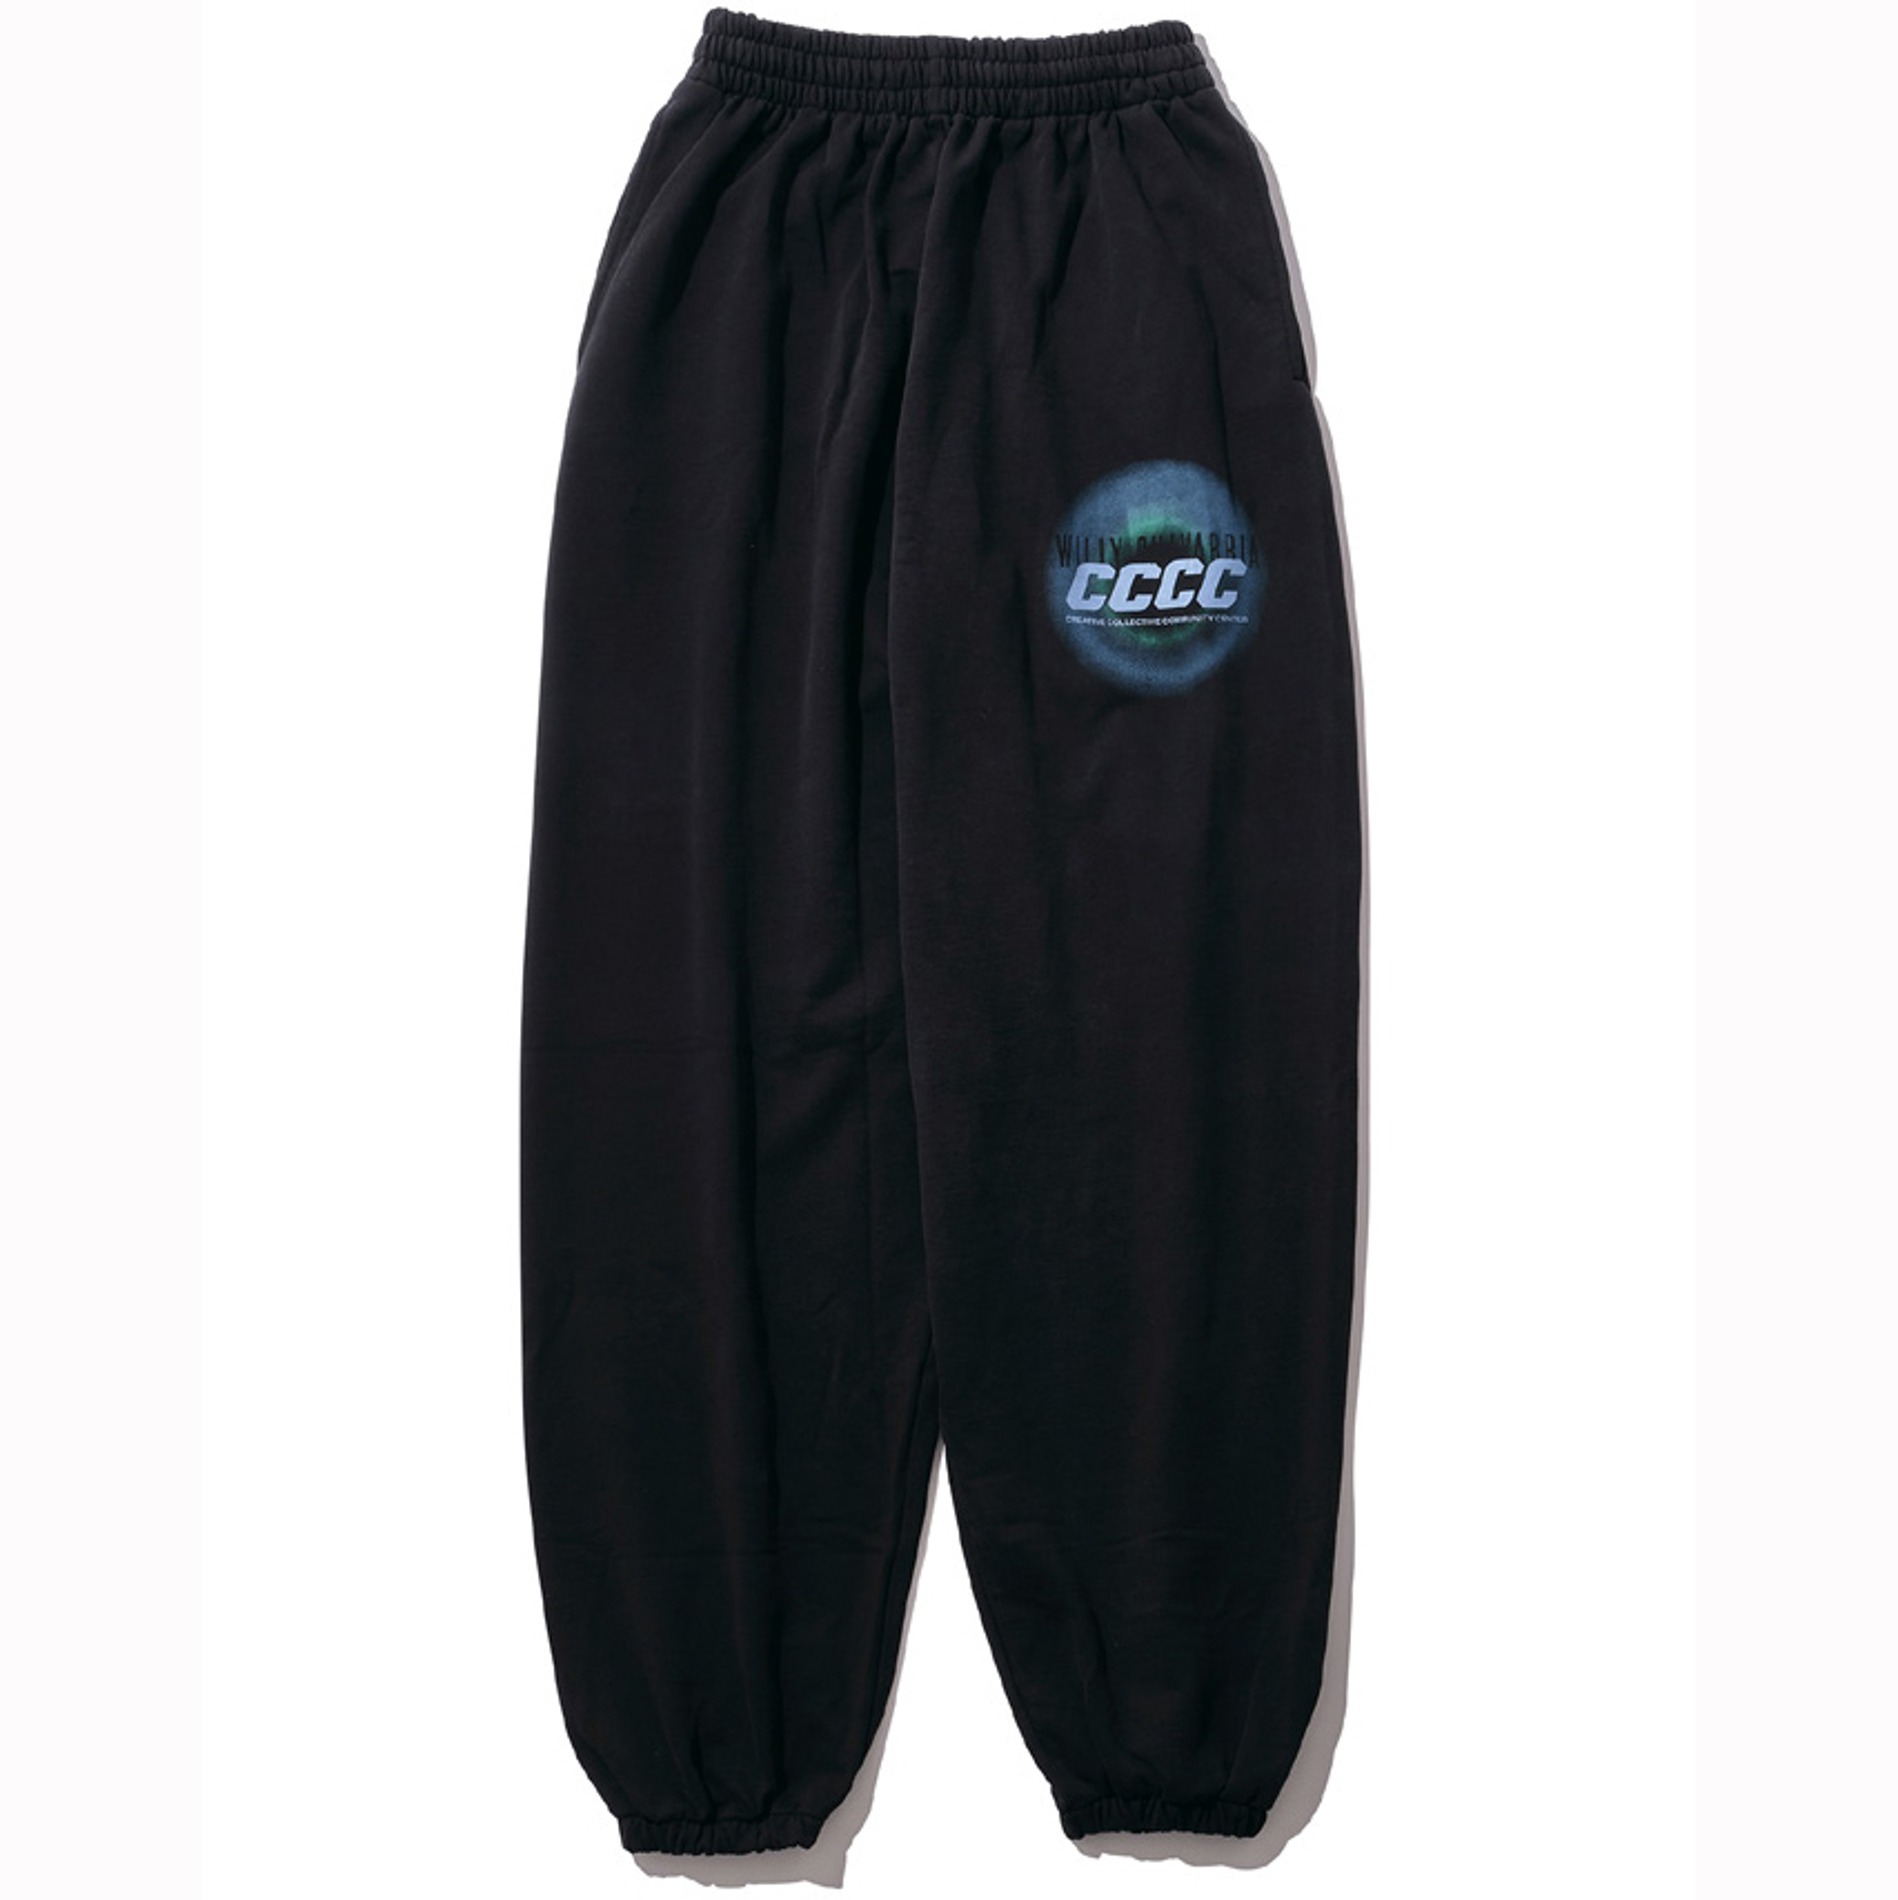 WILLY CHAVARRIA CCCC SWEAT PANT BLACK